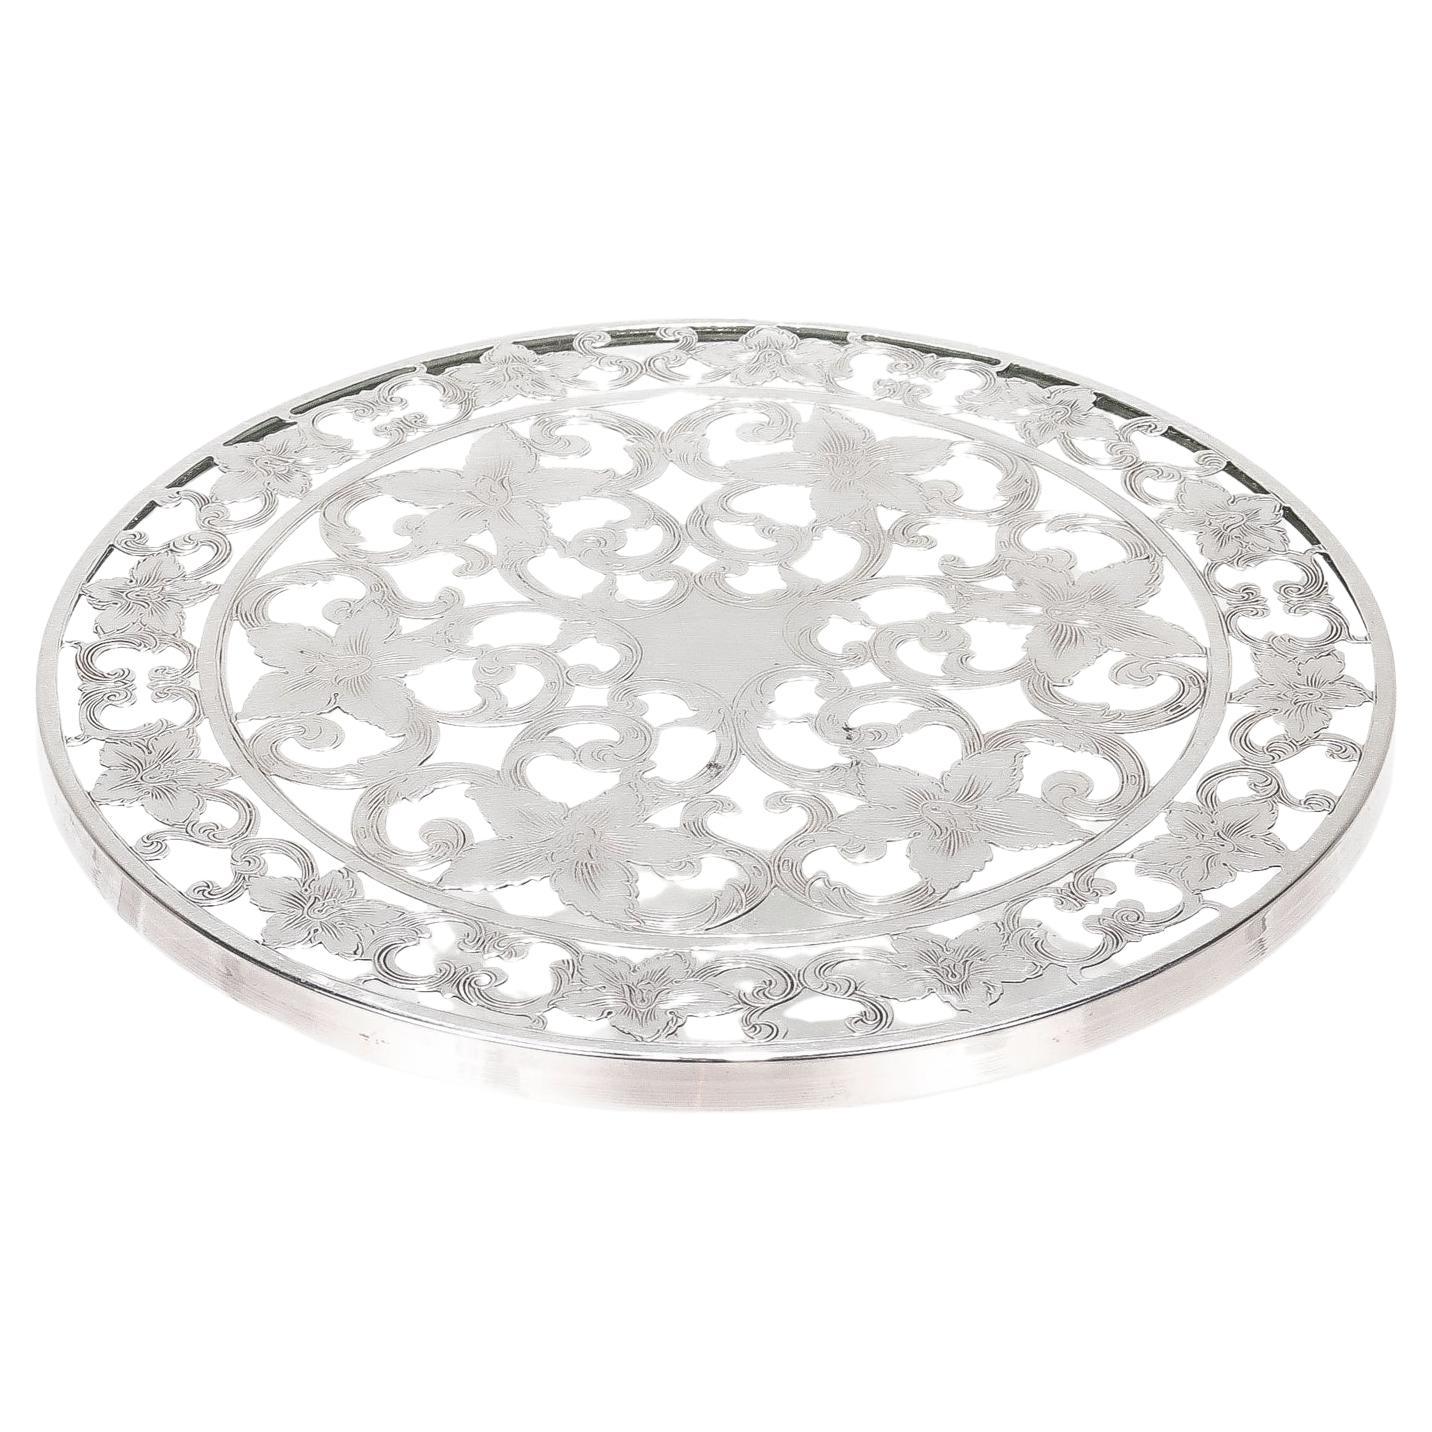 Antique Edwardian Silver Overlay & Glass Floral Wine Coaster or Table Trivet For Sale